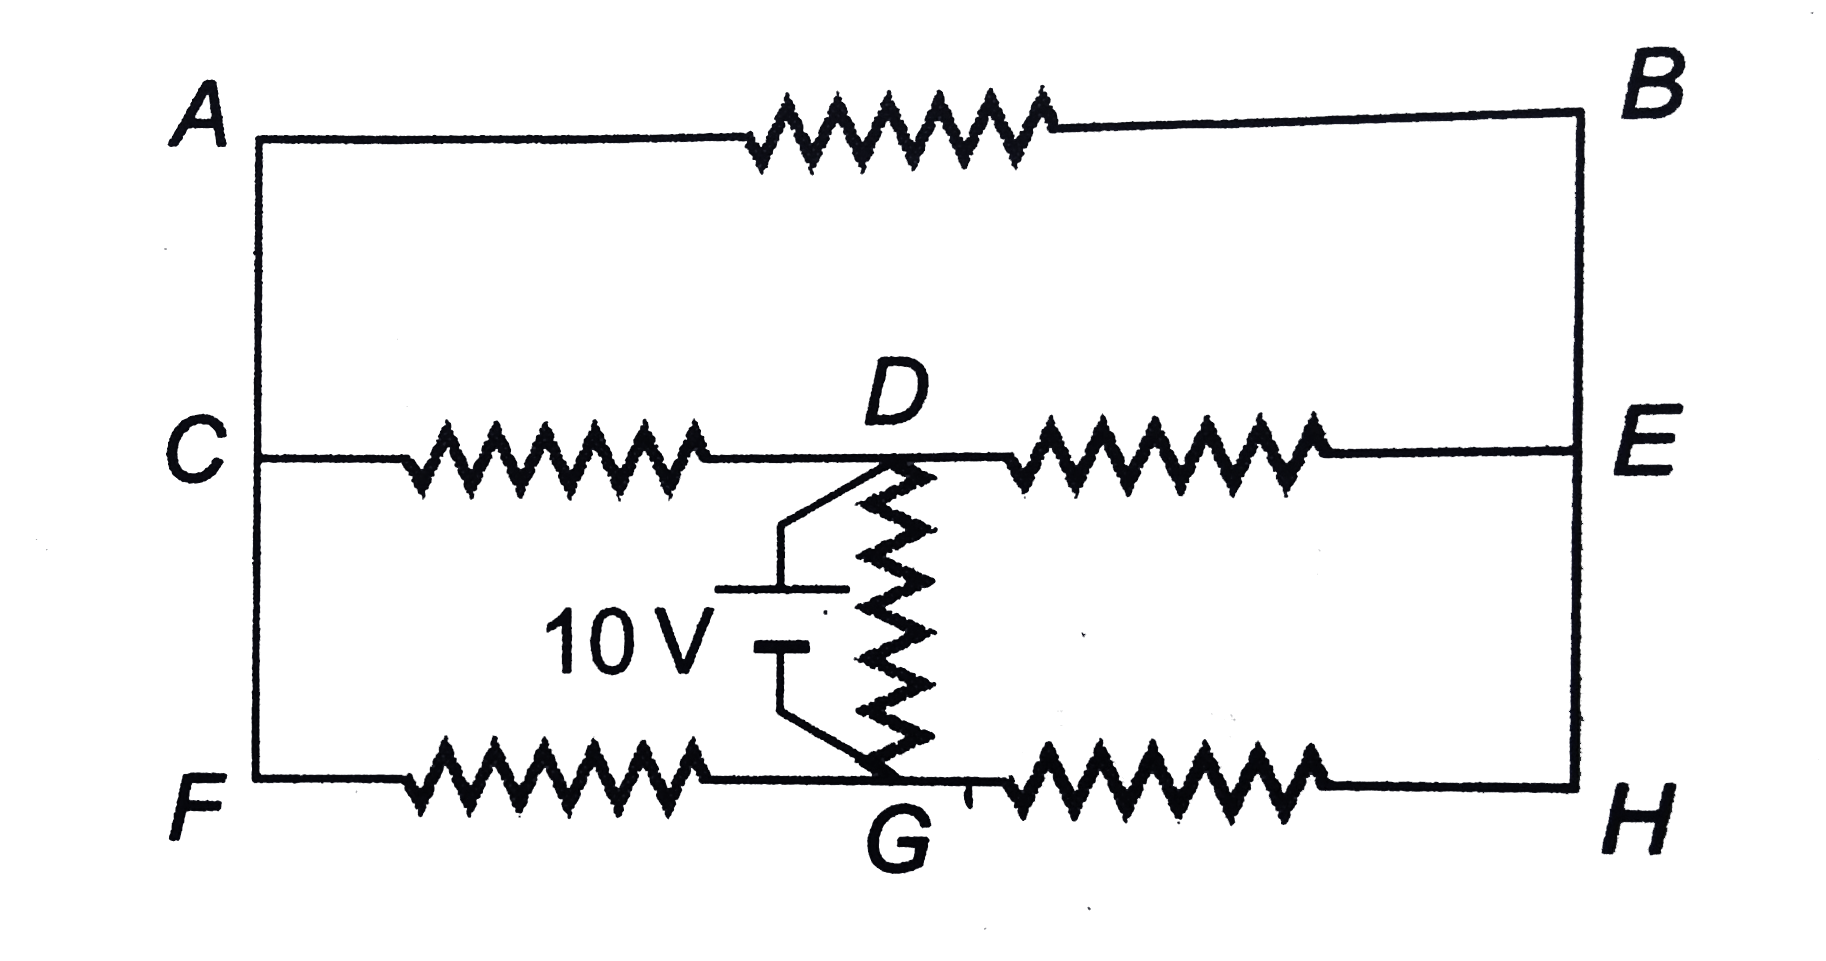 All resistance shown in the circuit are 2Omega each. The current in the resistance between D and E is